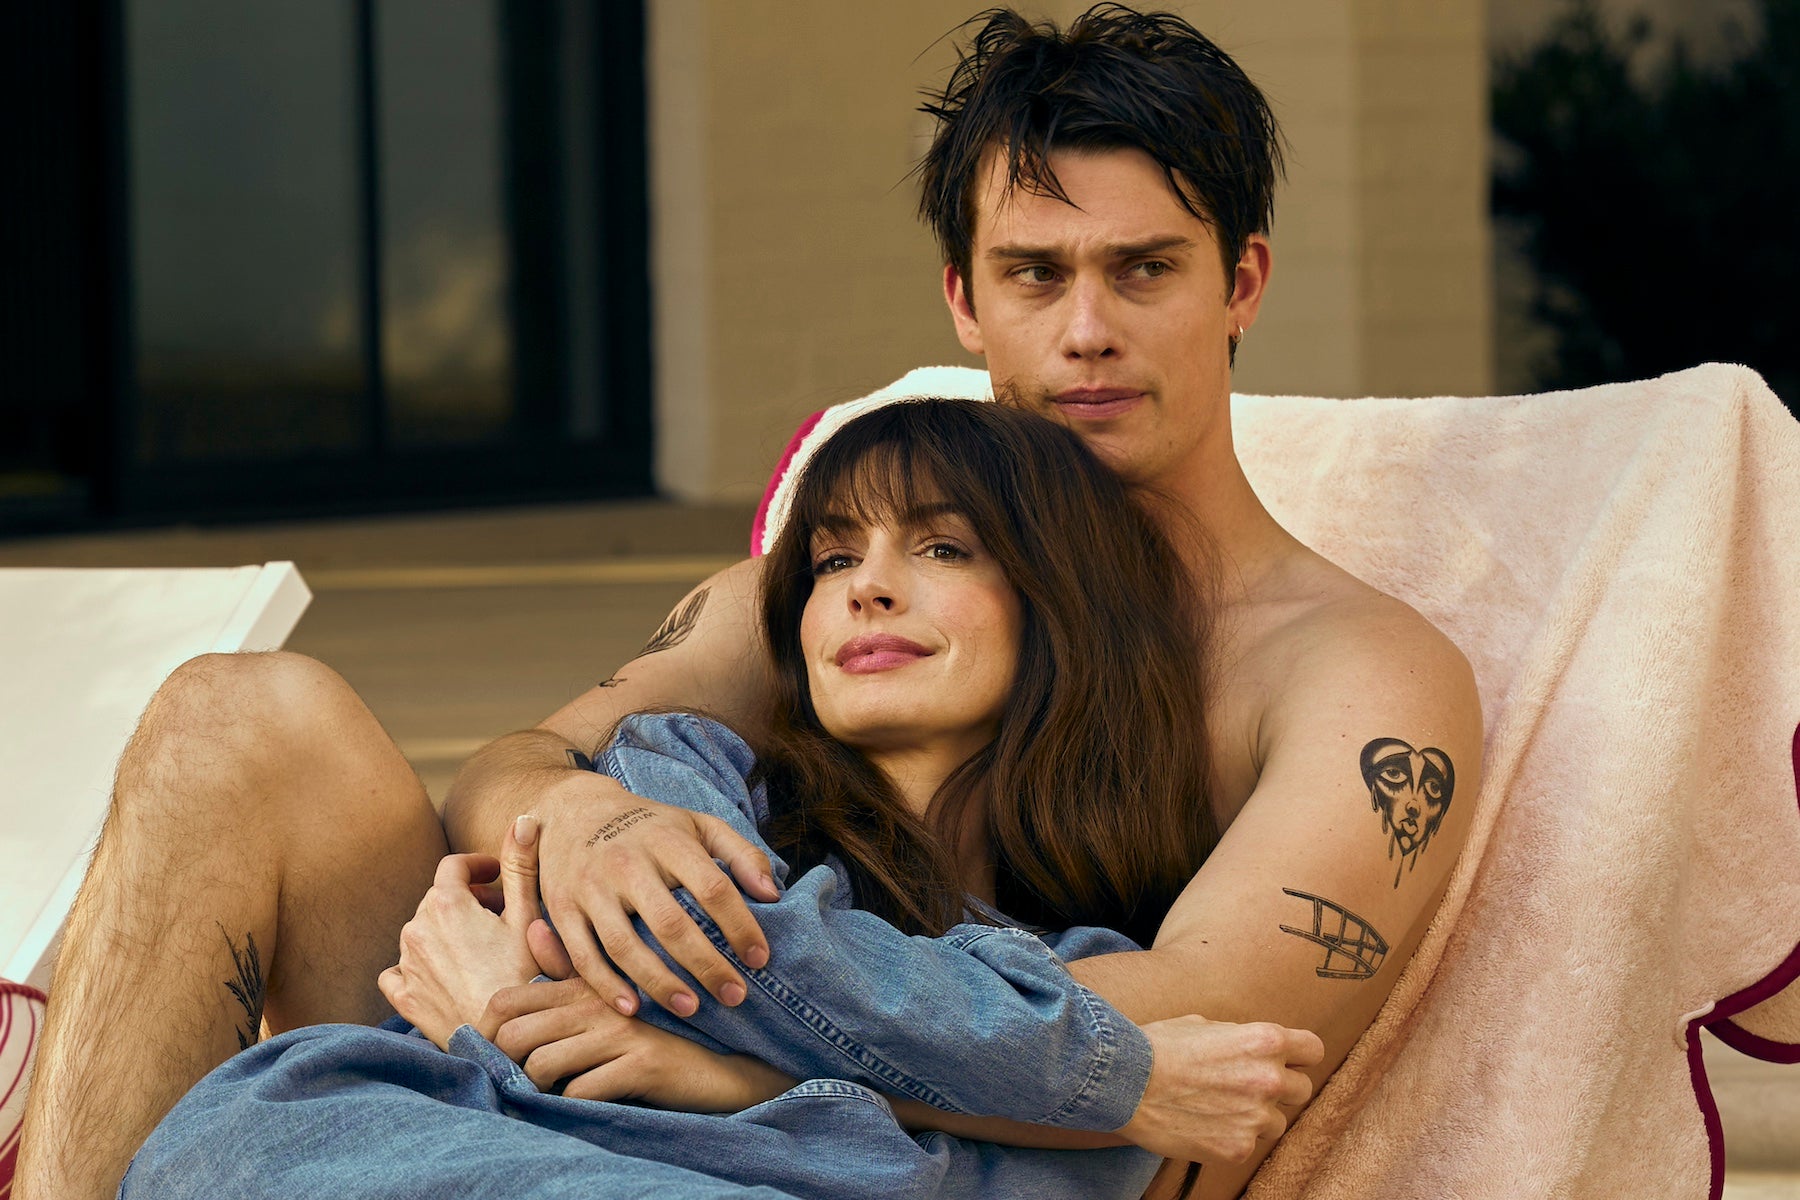 Still from 'The Idea of You' featuring Anne Hathaway and Nicholas Galitzine embracing each other on a tanning chair